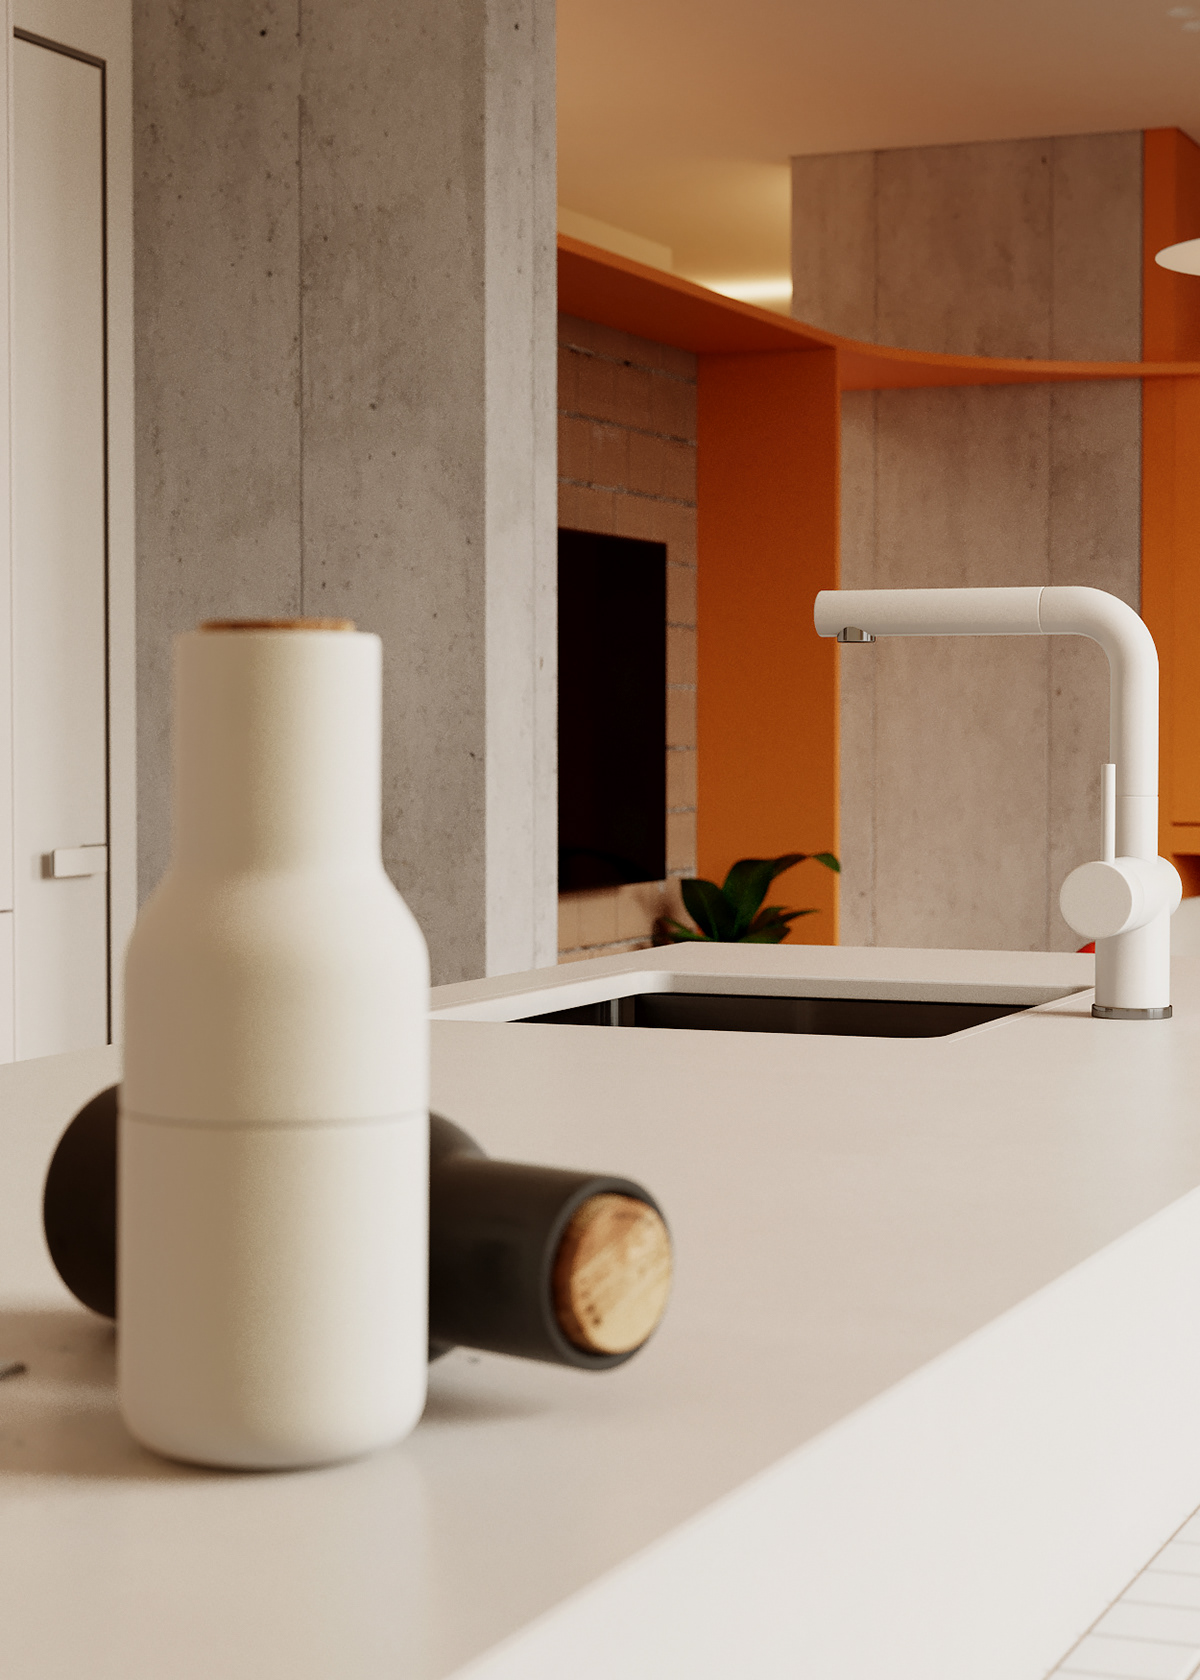 A sink with a delicate design complements the color scheme of the entire zone.